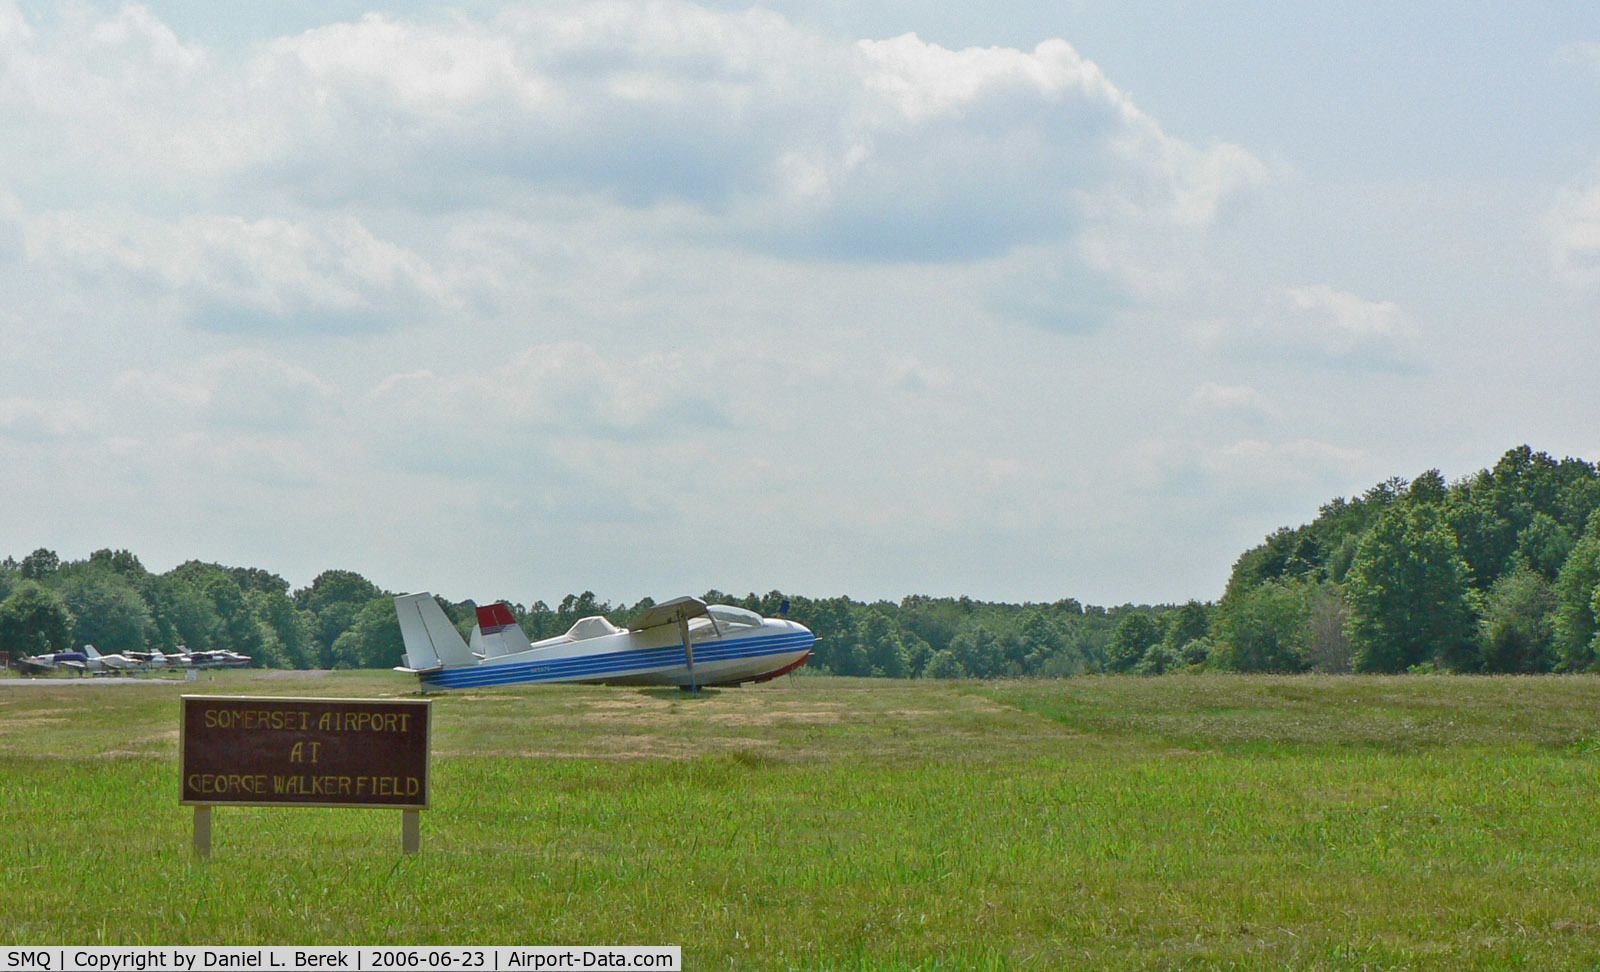 Somerset Airport (SMQ) - The grass strip is home to sailplanes and other more older aircraft.